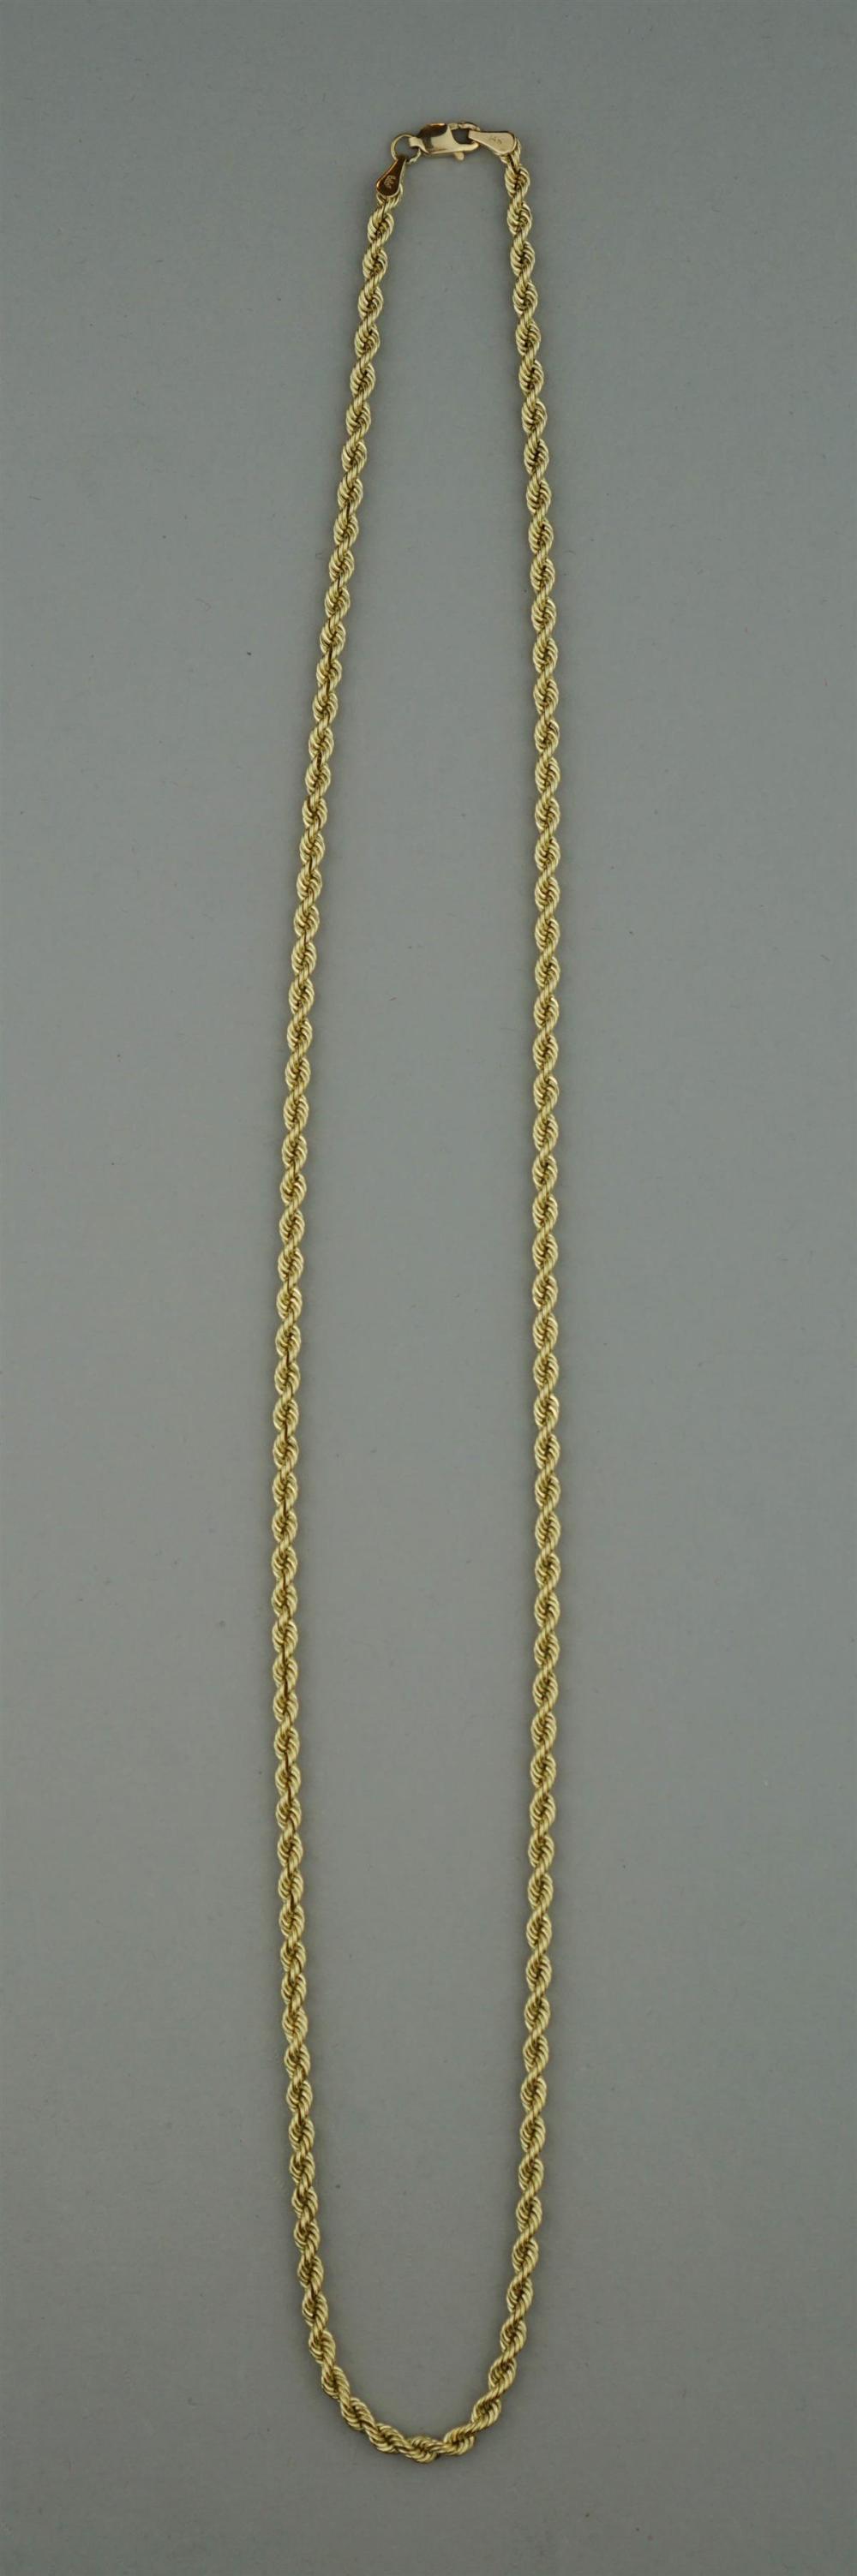 14K YELLOW GOLD ROPE NECKLACE14K 339b16